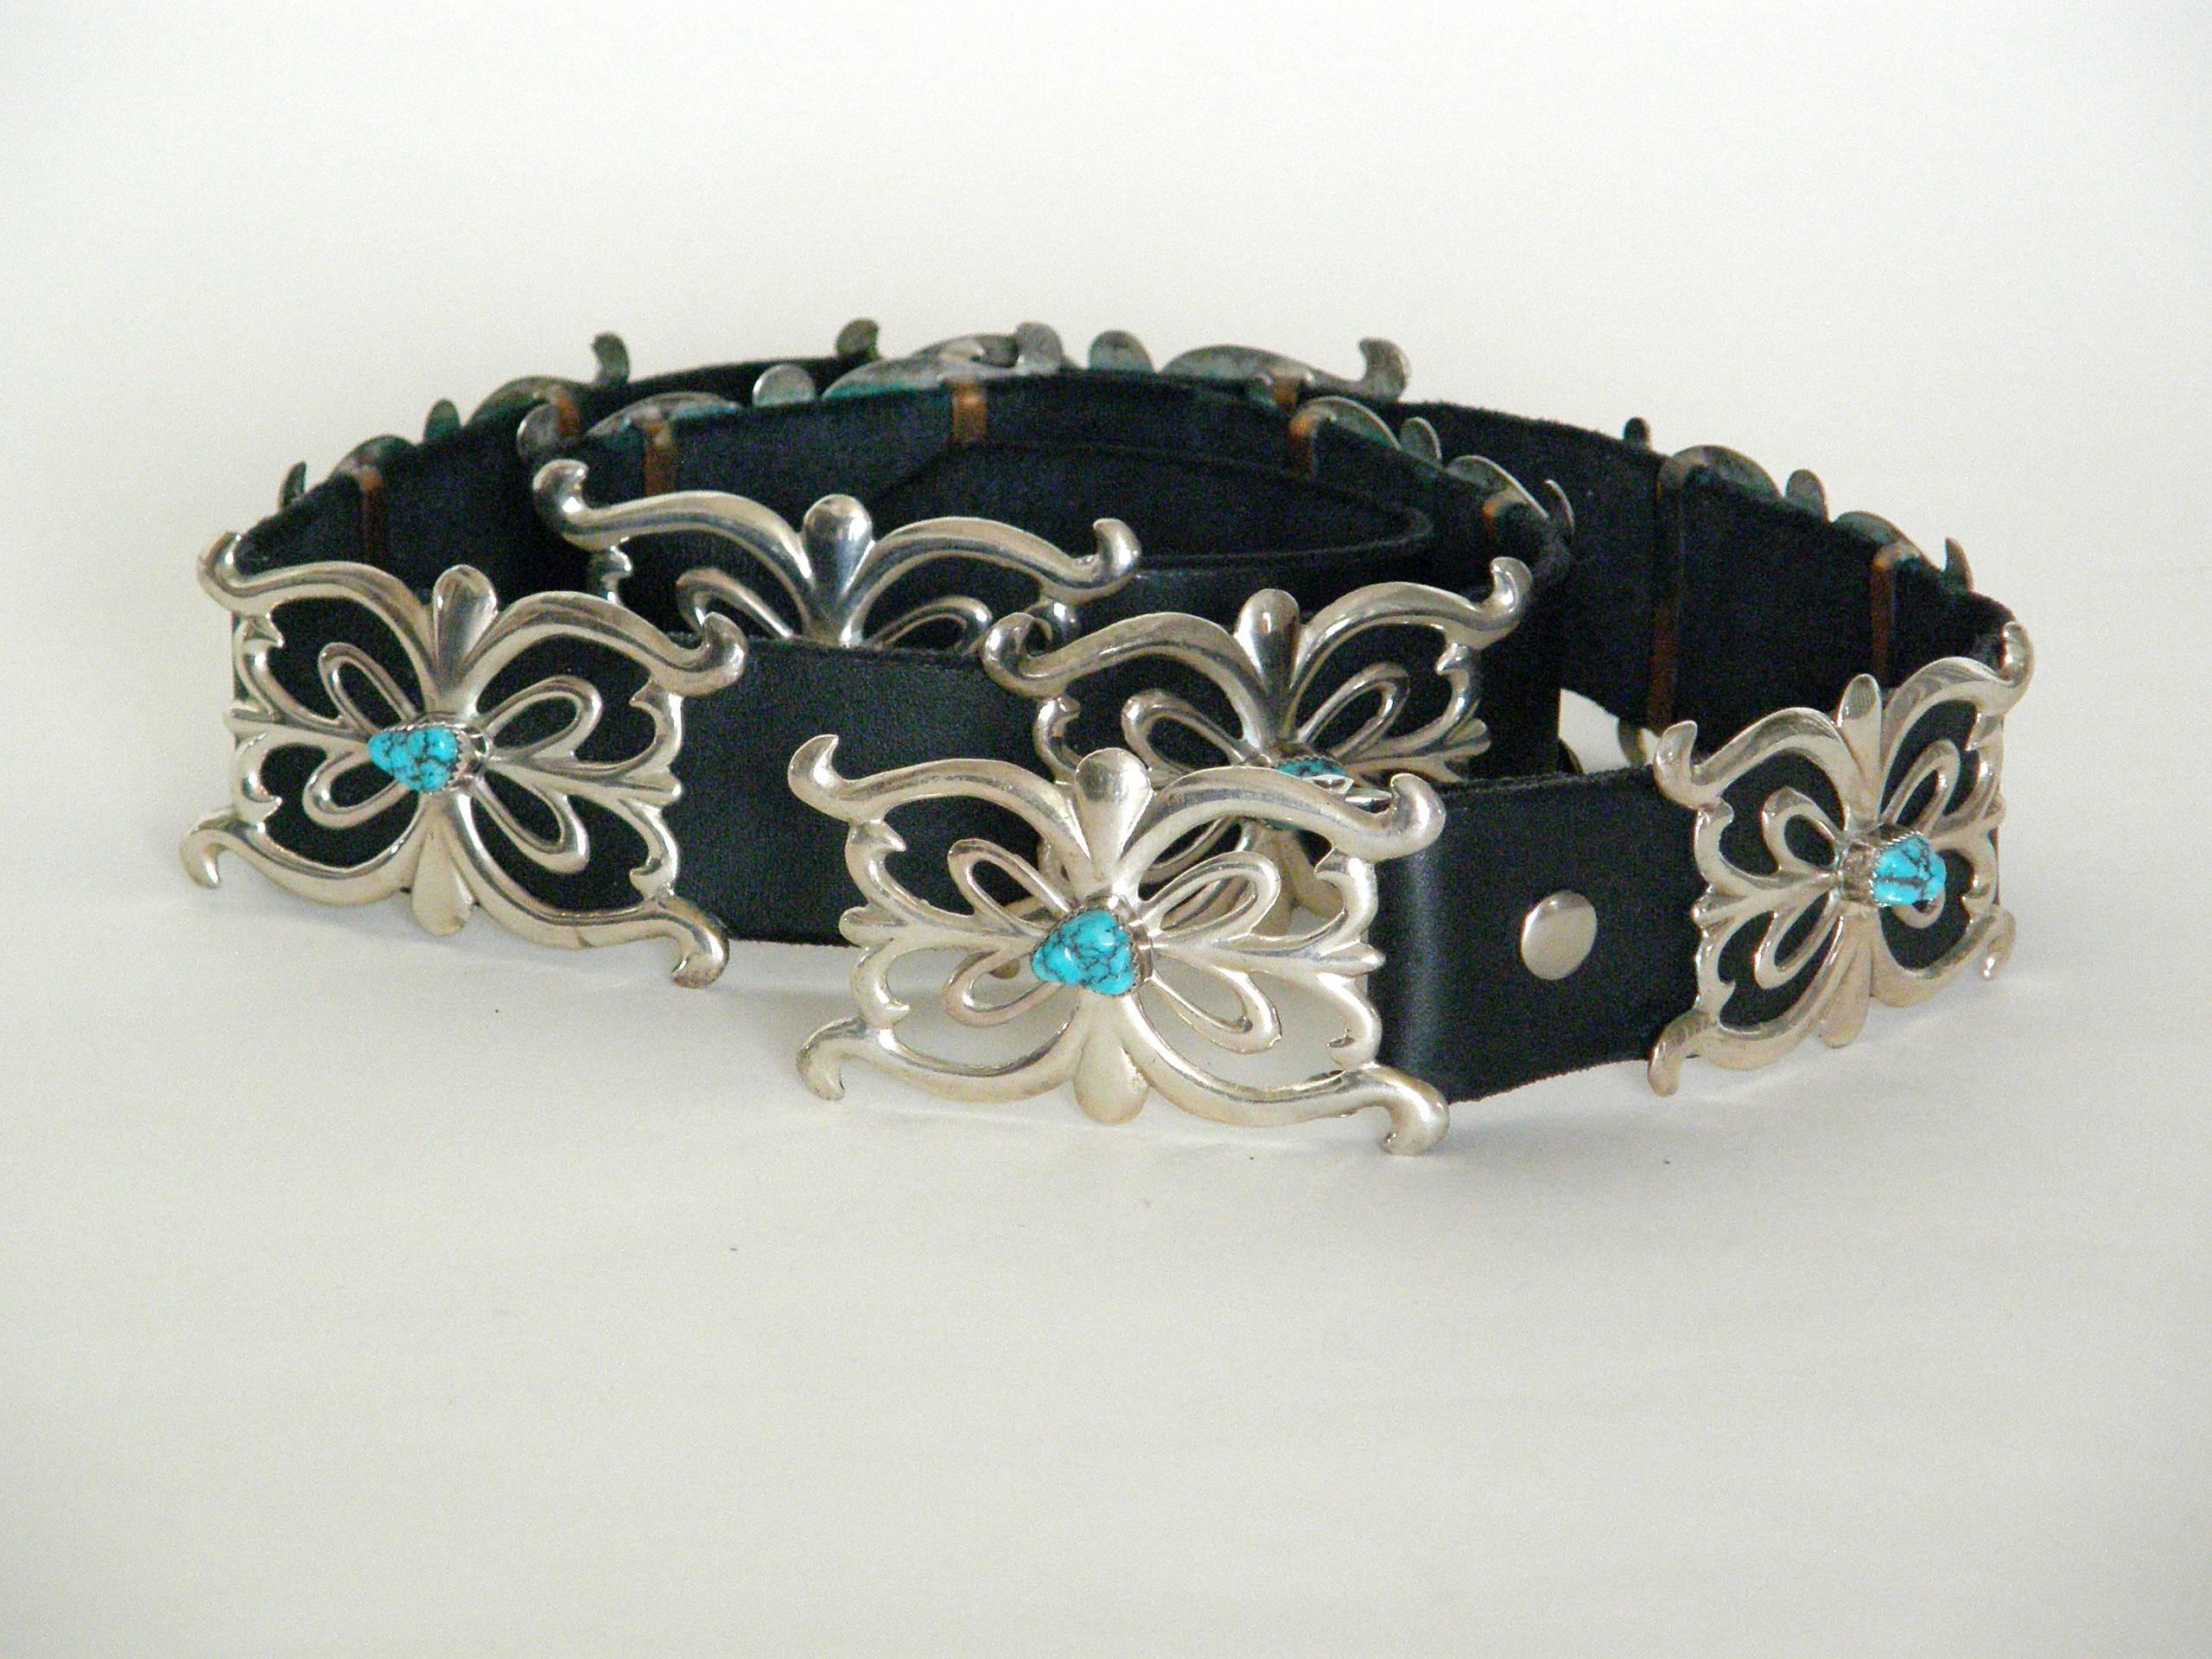 Black leather belt featuring ten sandcast sterling conchos, including the buckle, that are set with turquoise stones. This piece is probably Navajo. It has not been worn. It's never had holes punched in the leather, so they can be custom placed to